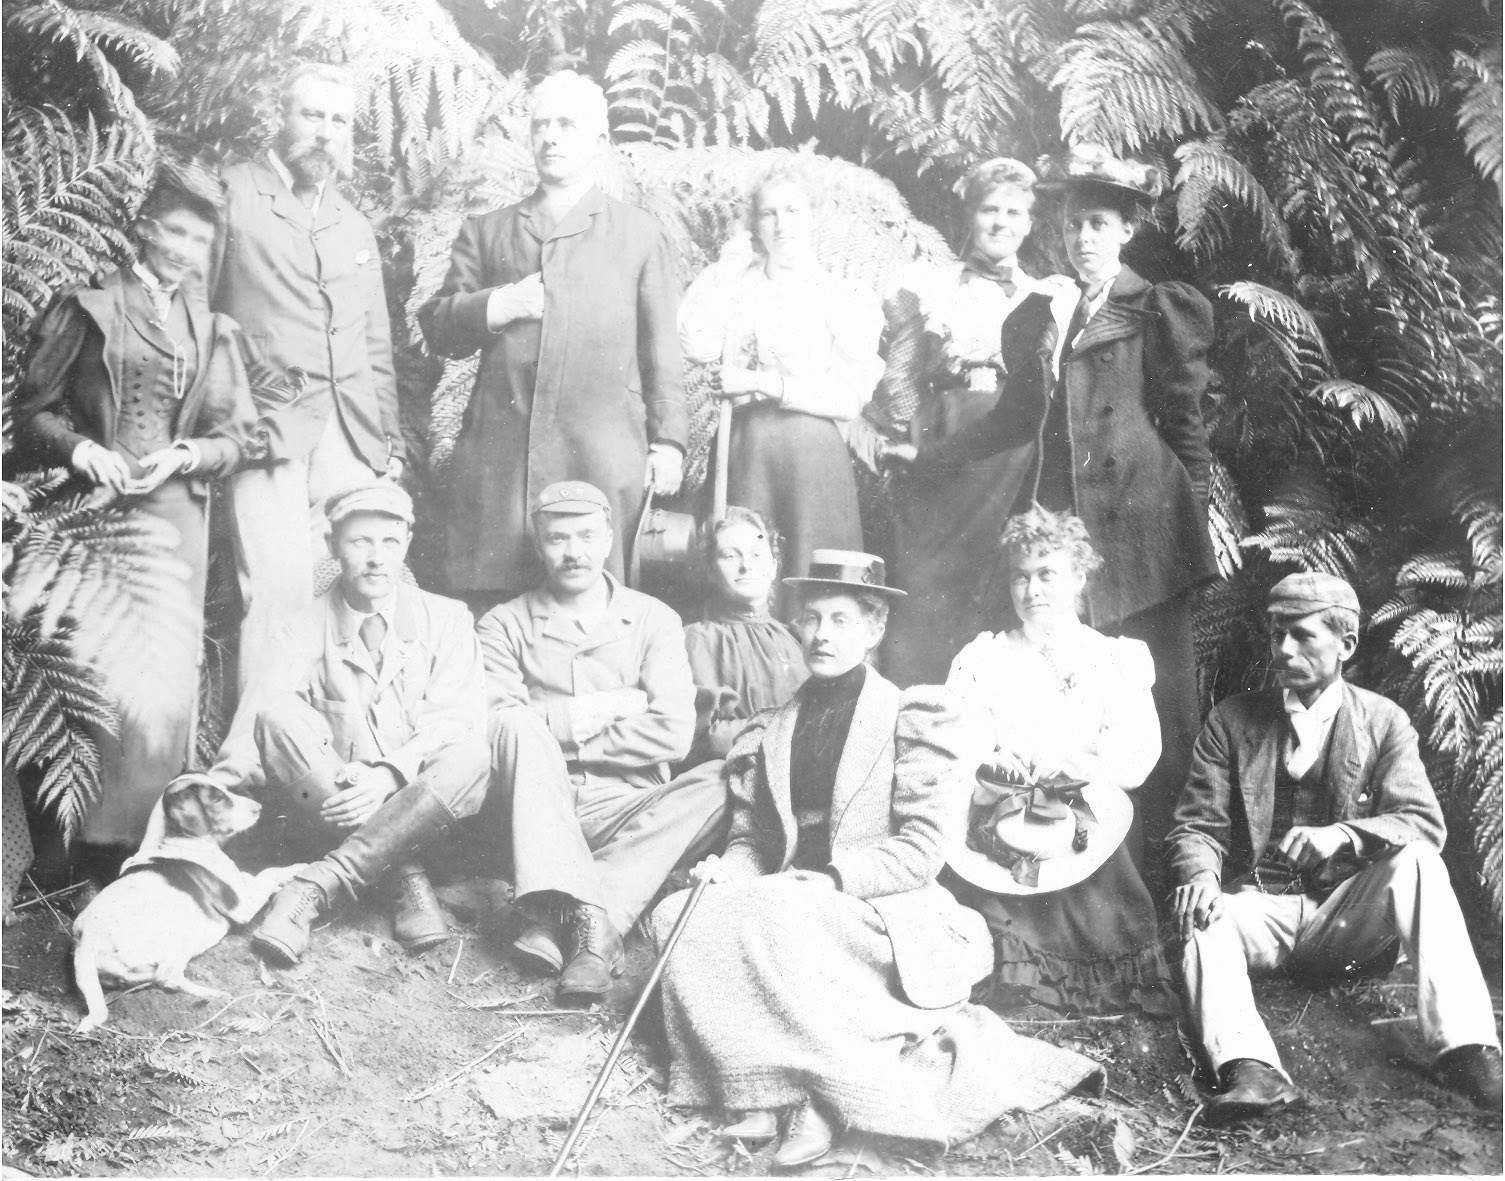 GROUP OF PEOPLE ASSOCIATED WITH THE UNIVERSITY AT MEDLOW CAVES